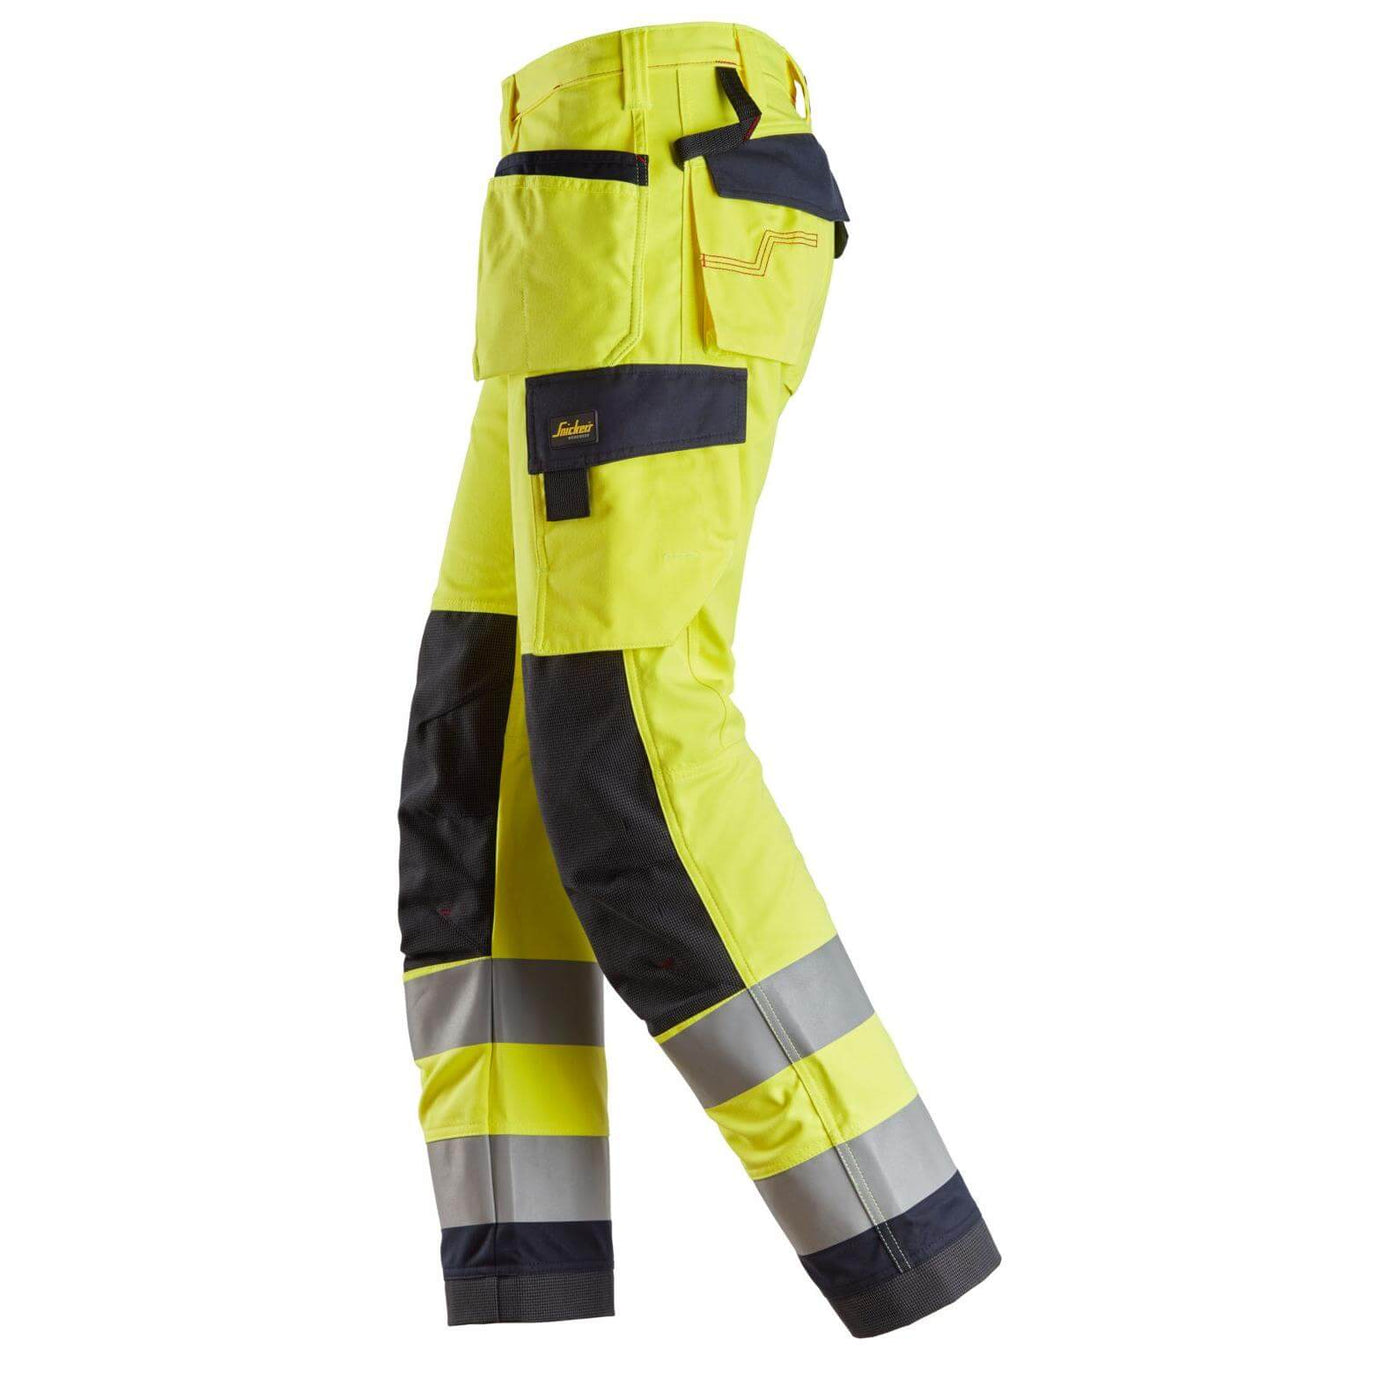 Snickers 6260 ProtecWork Hi Vis Work Trousers with Holster Pockets Class 2 Hi Vis Yellow Navy Blue left3710003 #colour_hi-vis-yellow-navy-blue